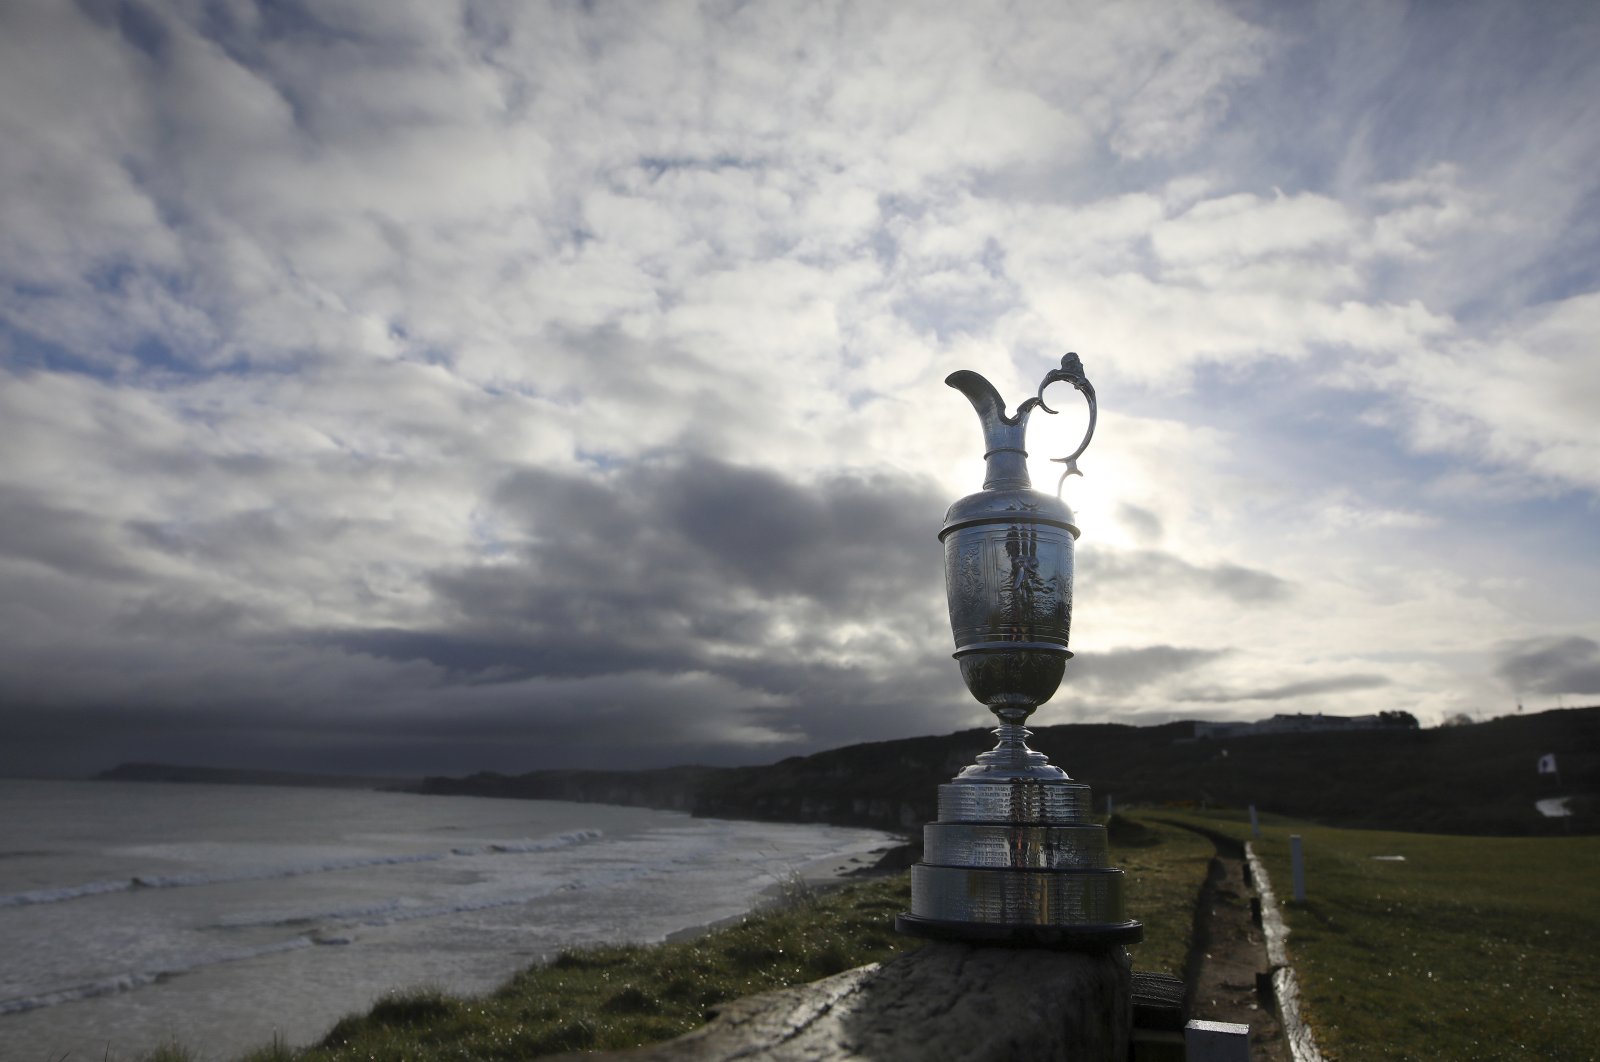 The British Open trophy is seen at Royal Portrush, Dunluce course, Northern Ireland, April 2, 2019. (AP Photo)